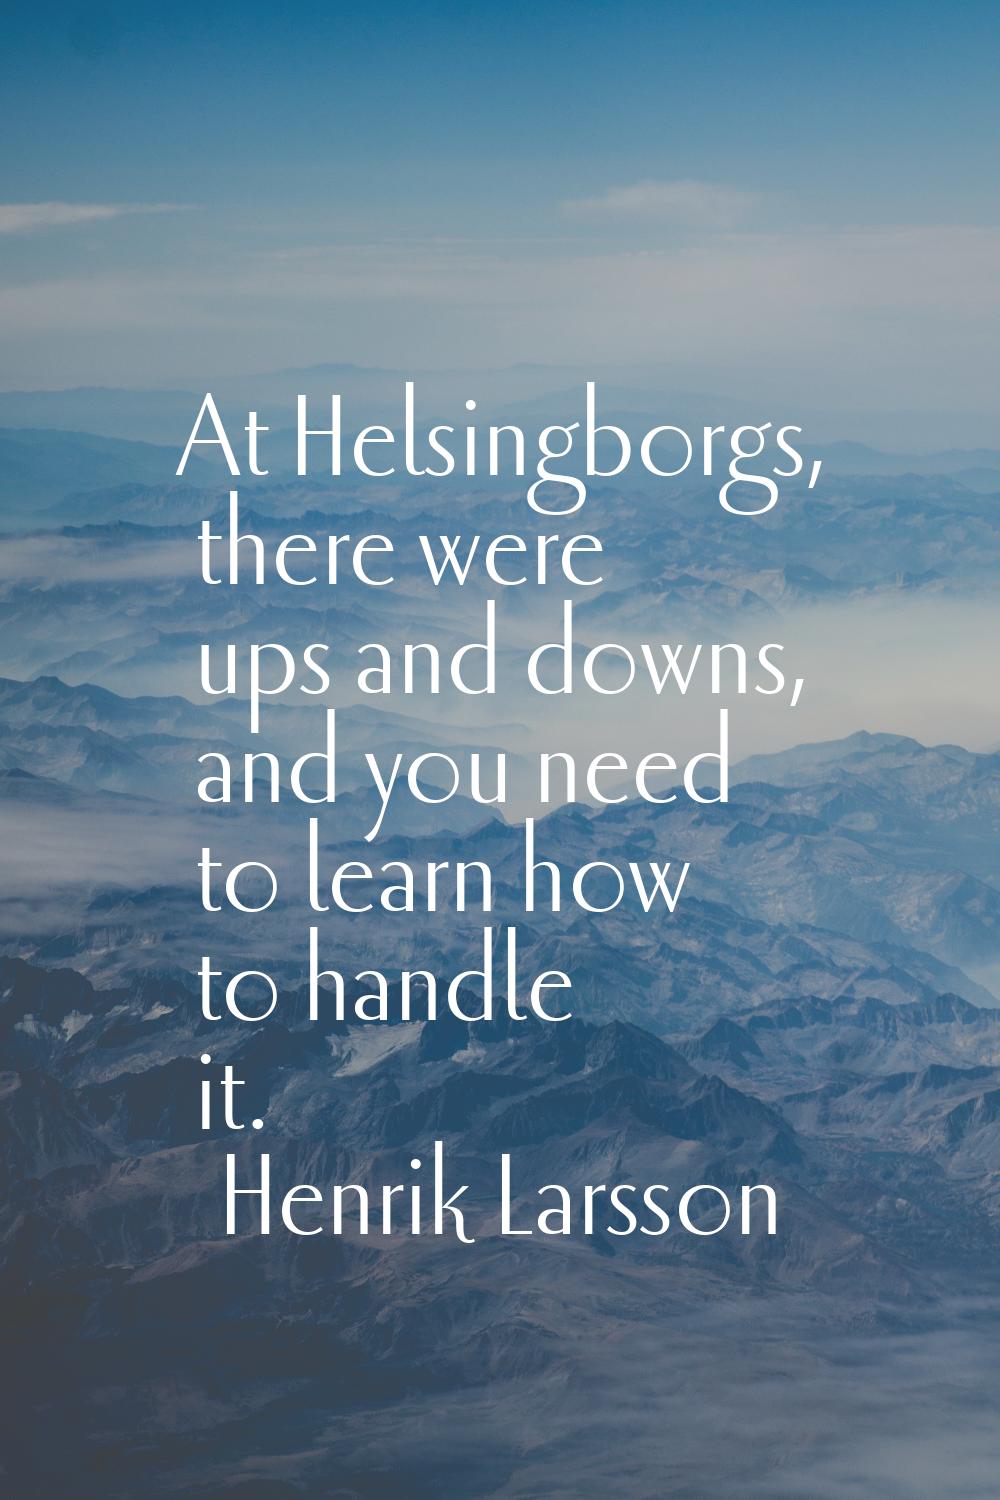 At Helsingborgs, there were ups and downs, and you need to learn how to handle it.